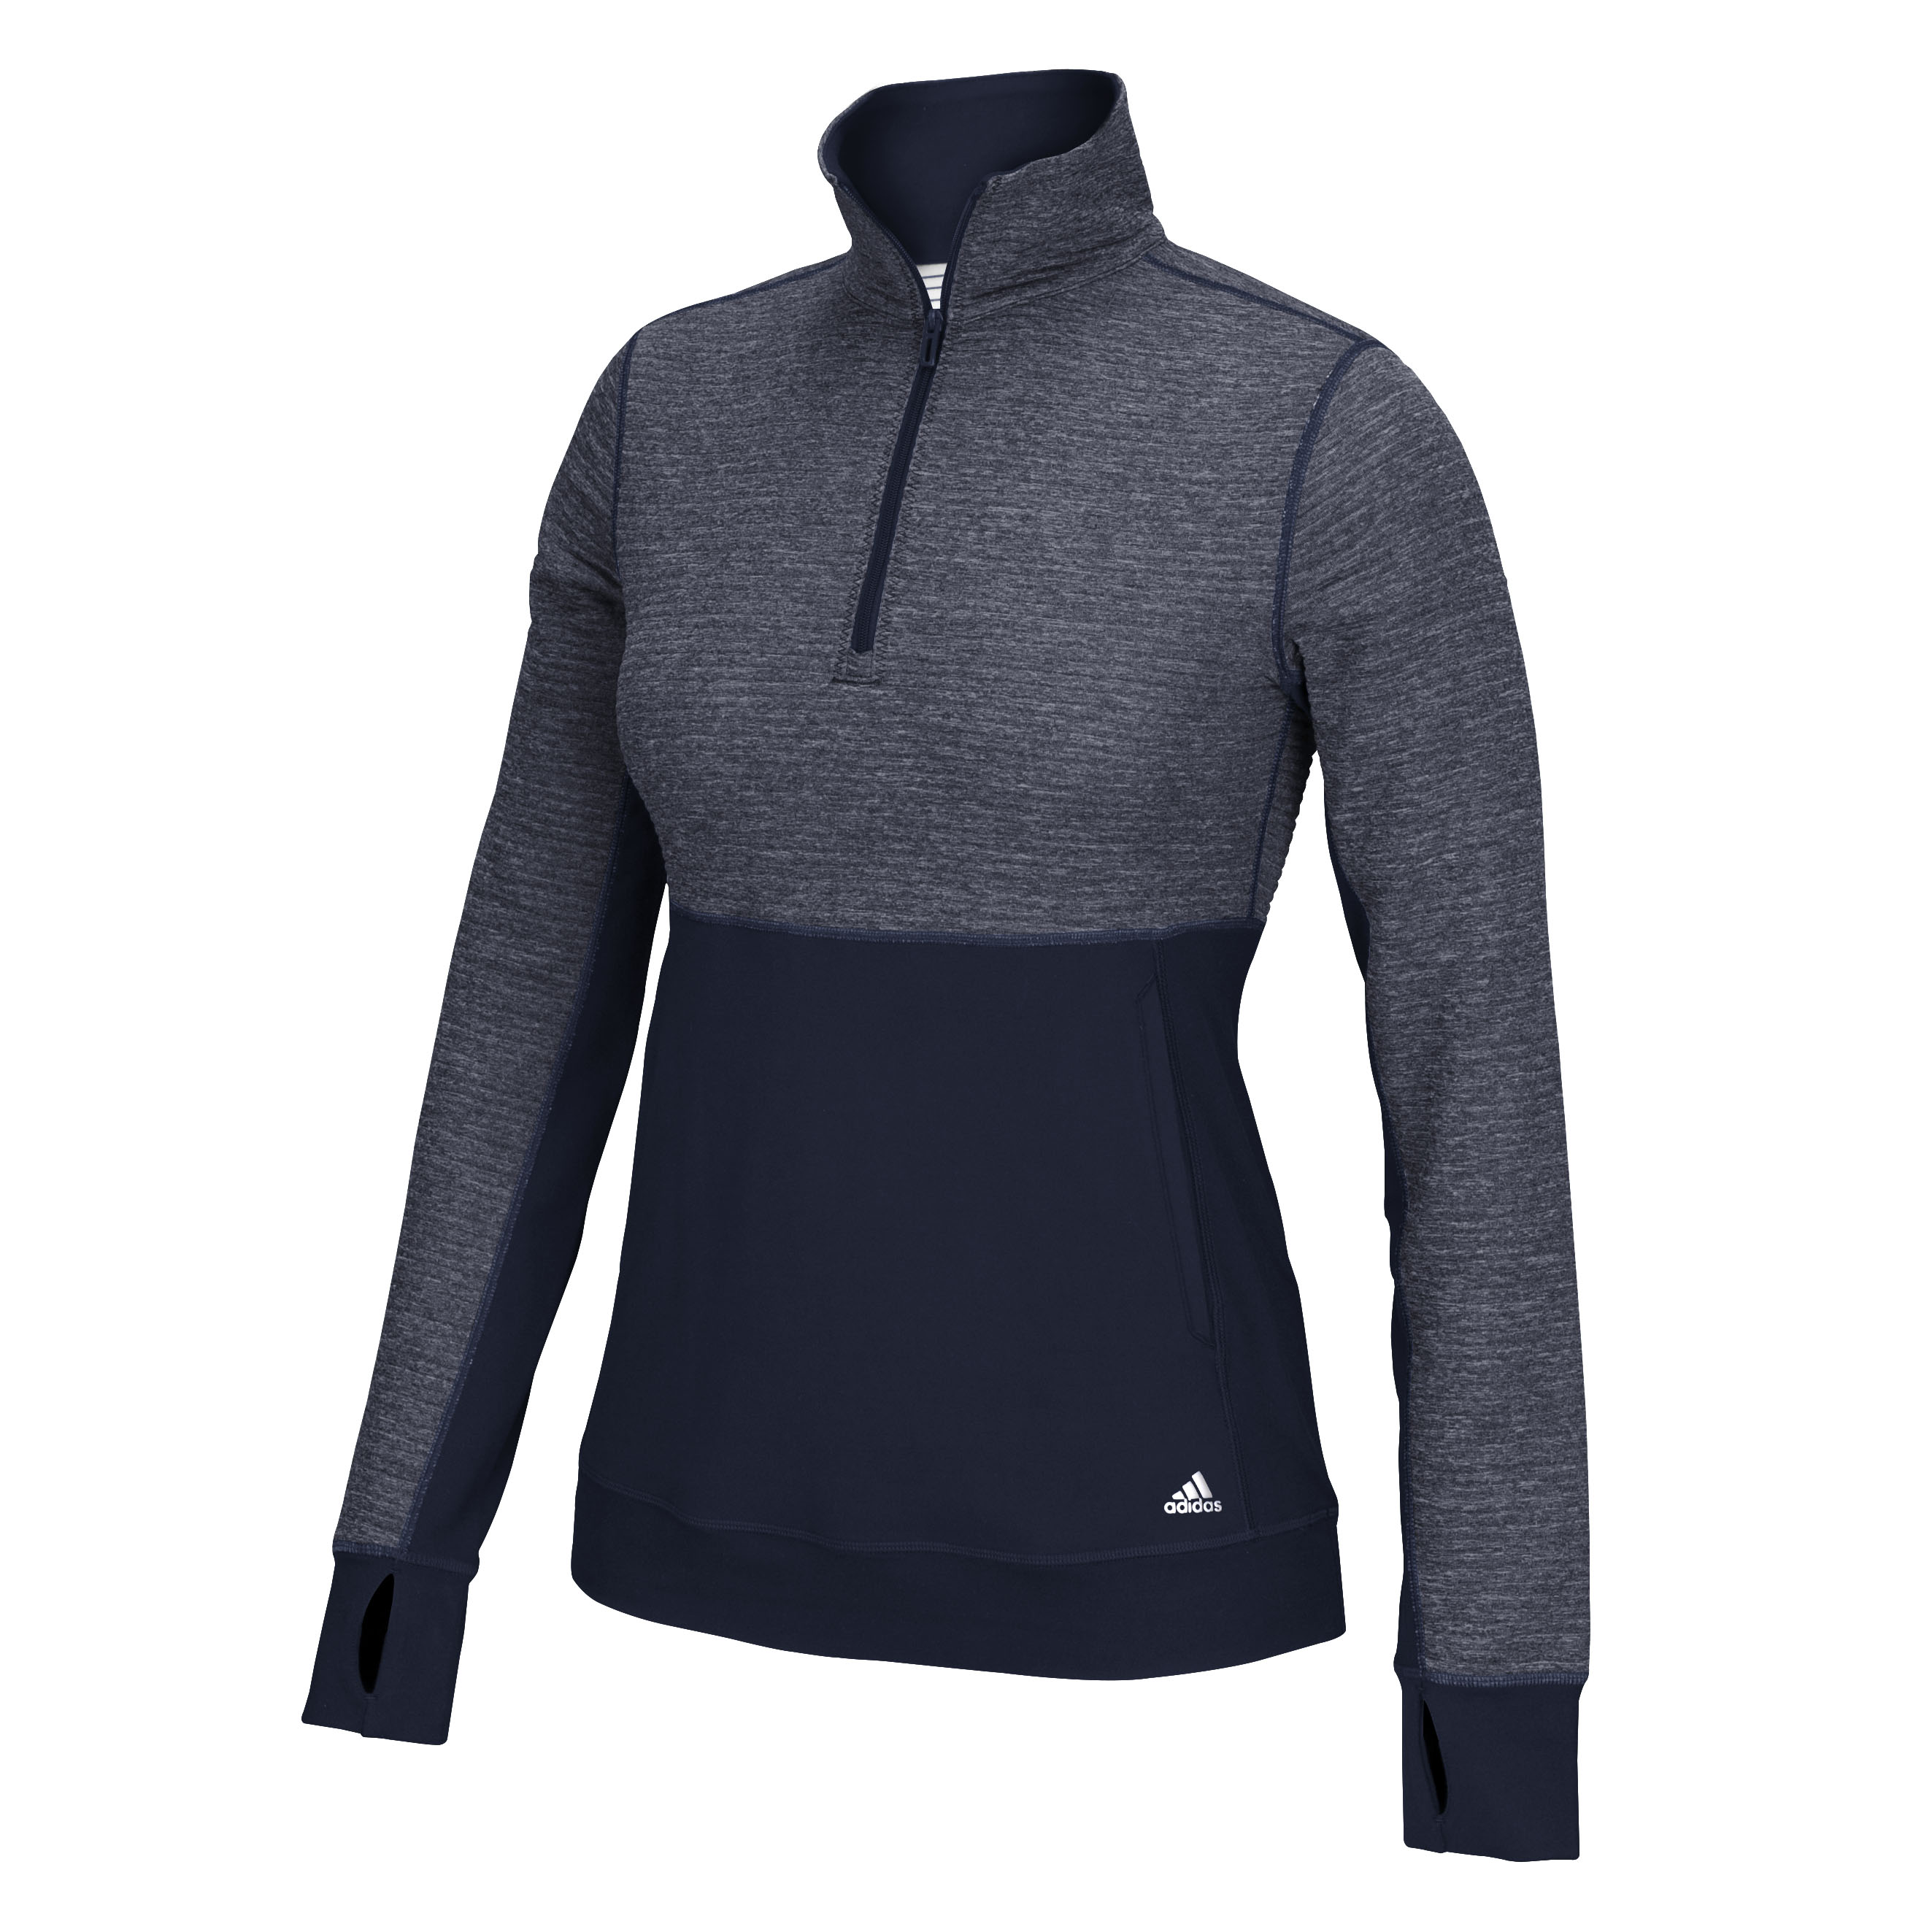 Adidas women’s Climalite twist 1/2 zip jacket for $18, free shipping